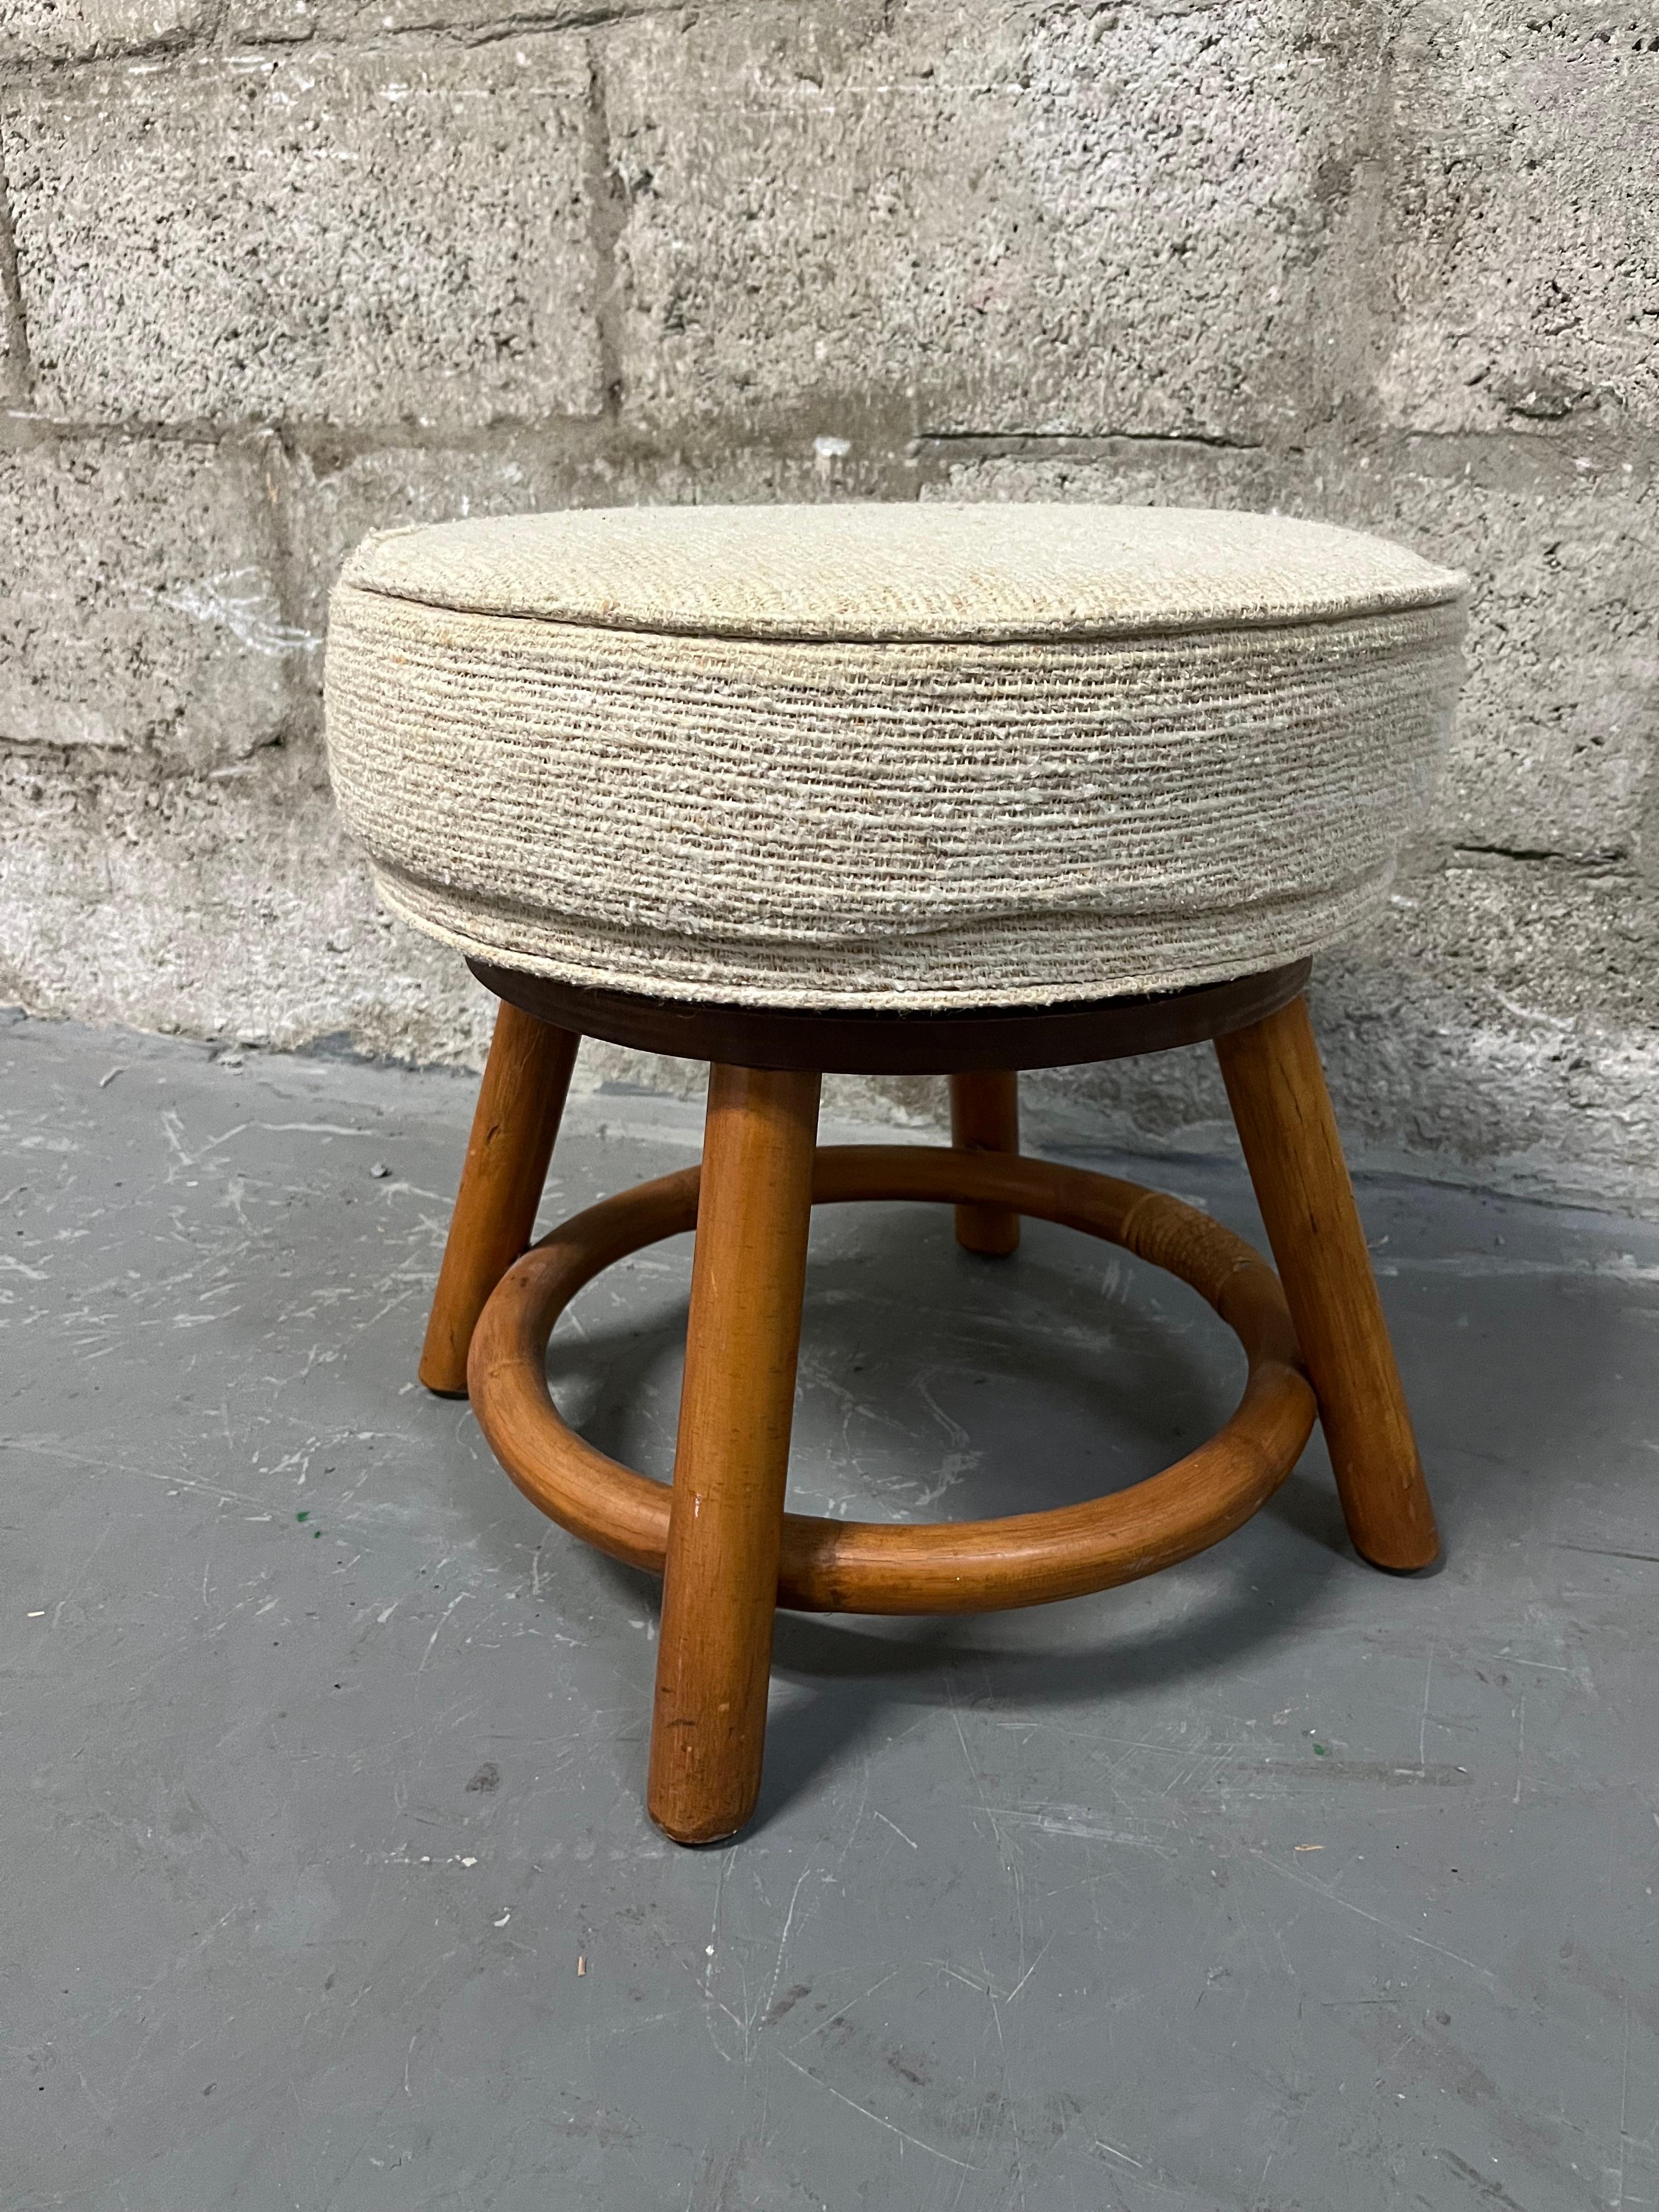 Bamboo Rattan Wicker Swivel Footstool in the Paul Frankl's Style. Circa 1970s  In Good Condition For Sale In Miami, FL